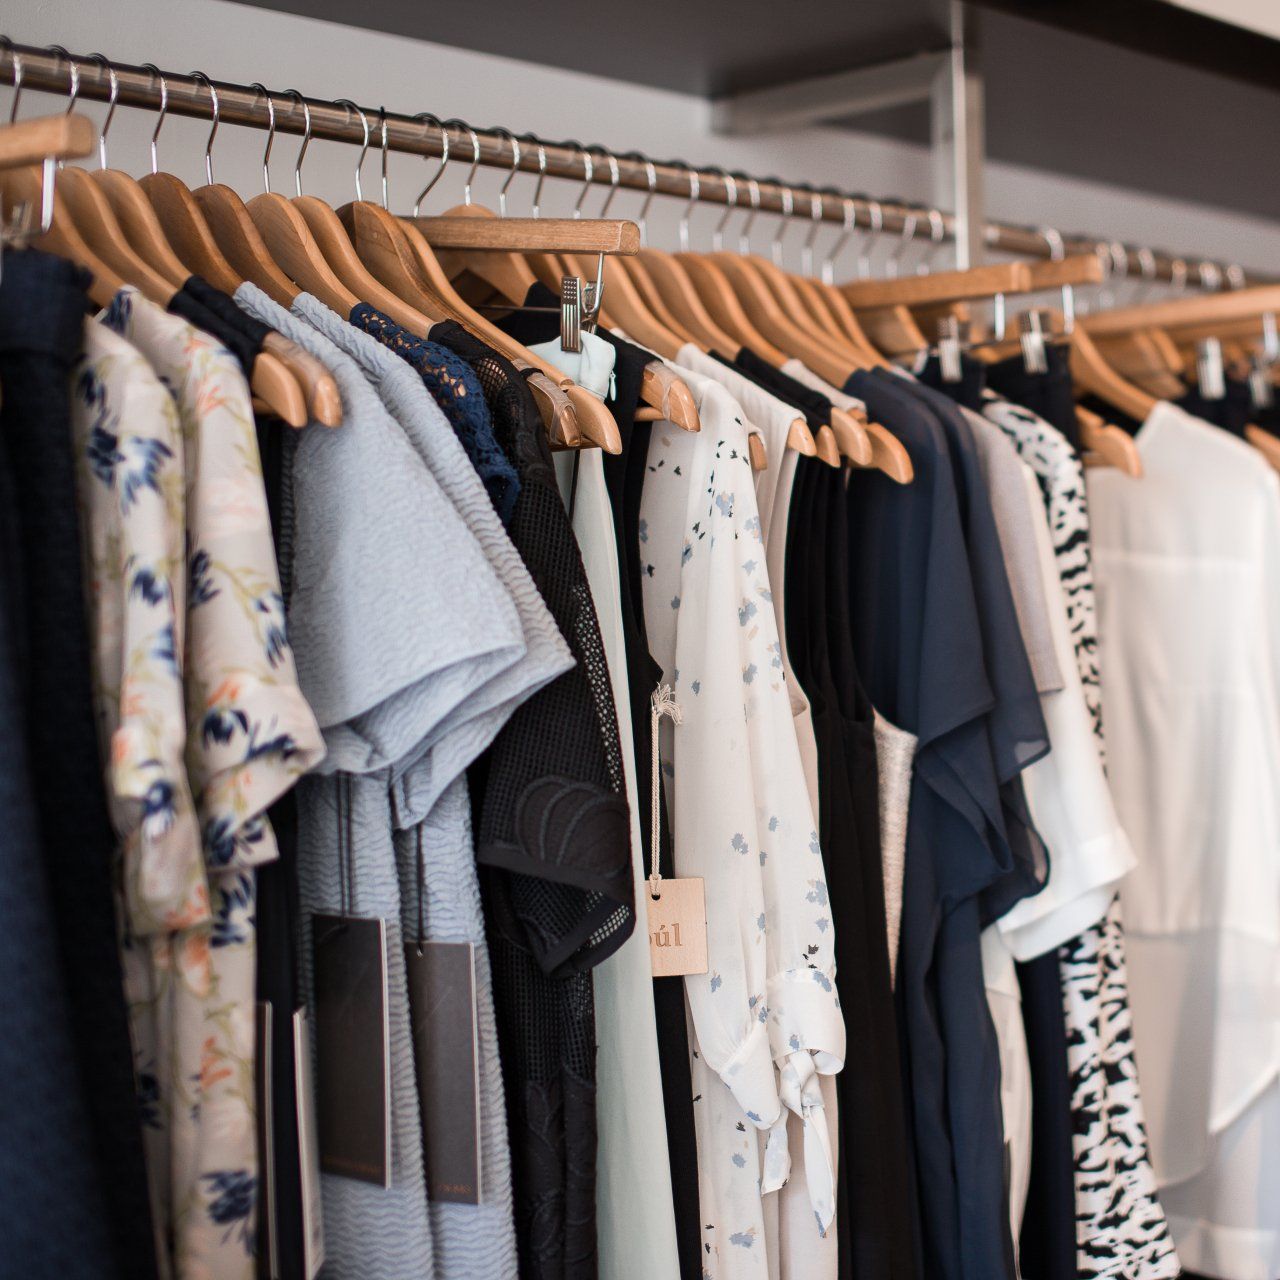 Image of clothes hanging in a closet.